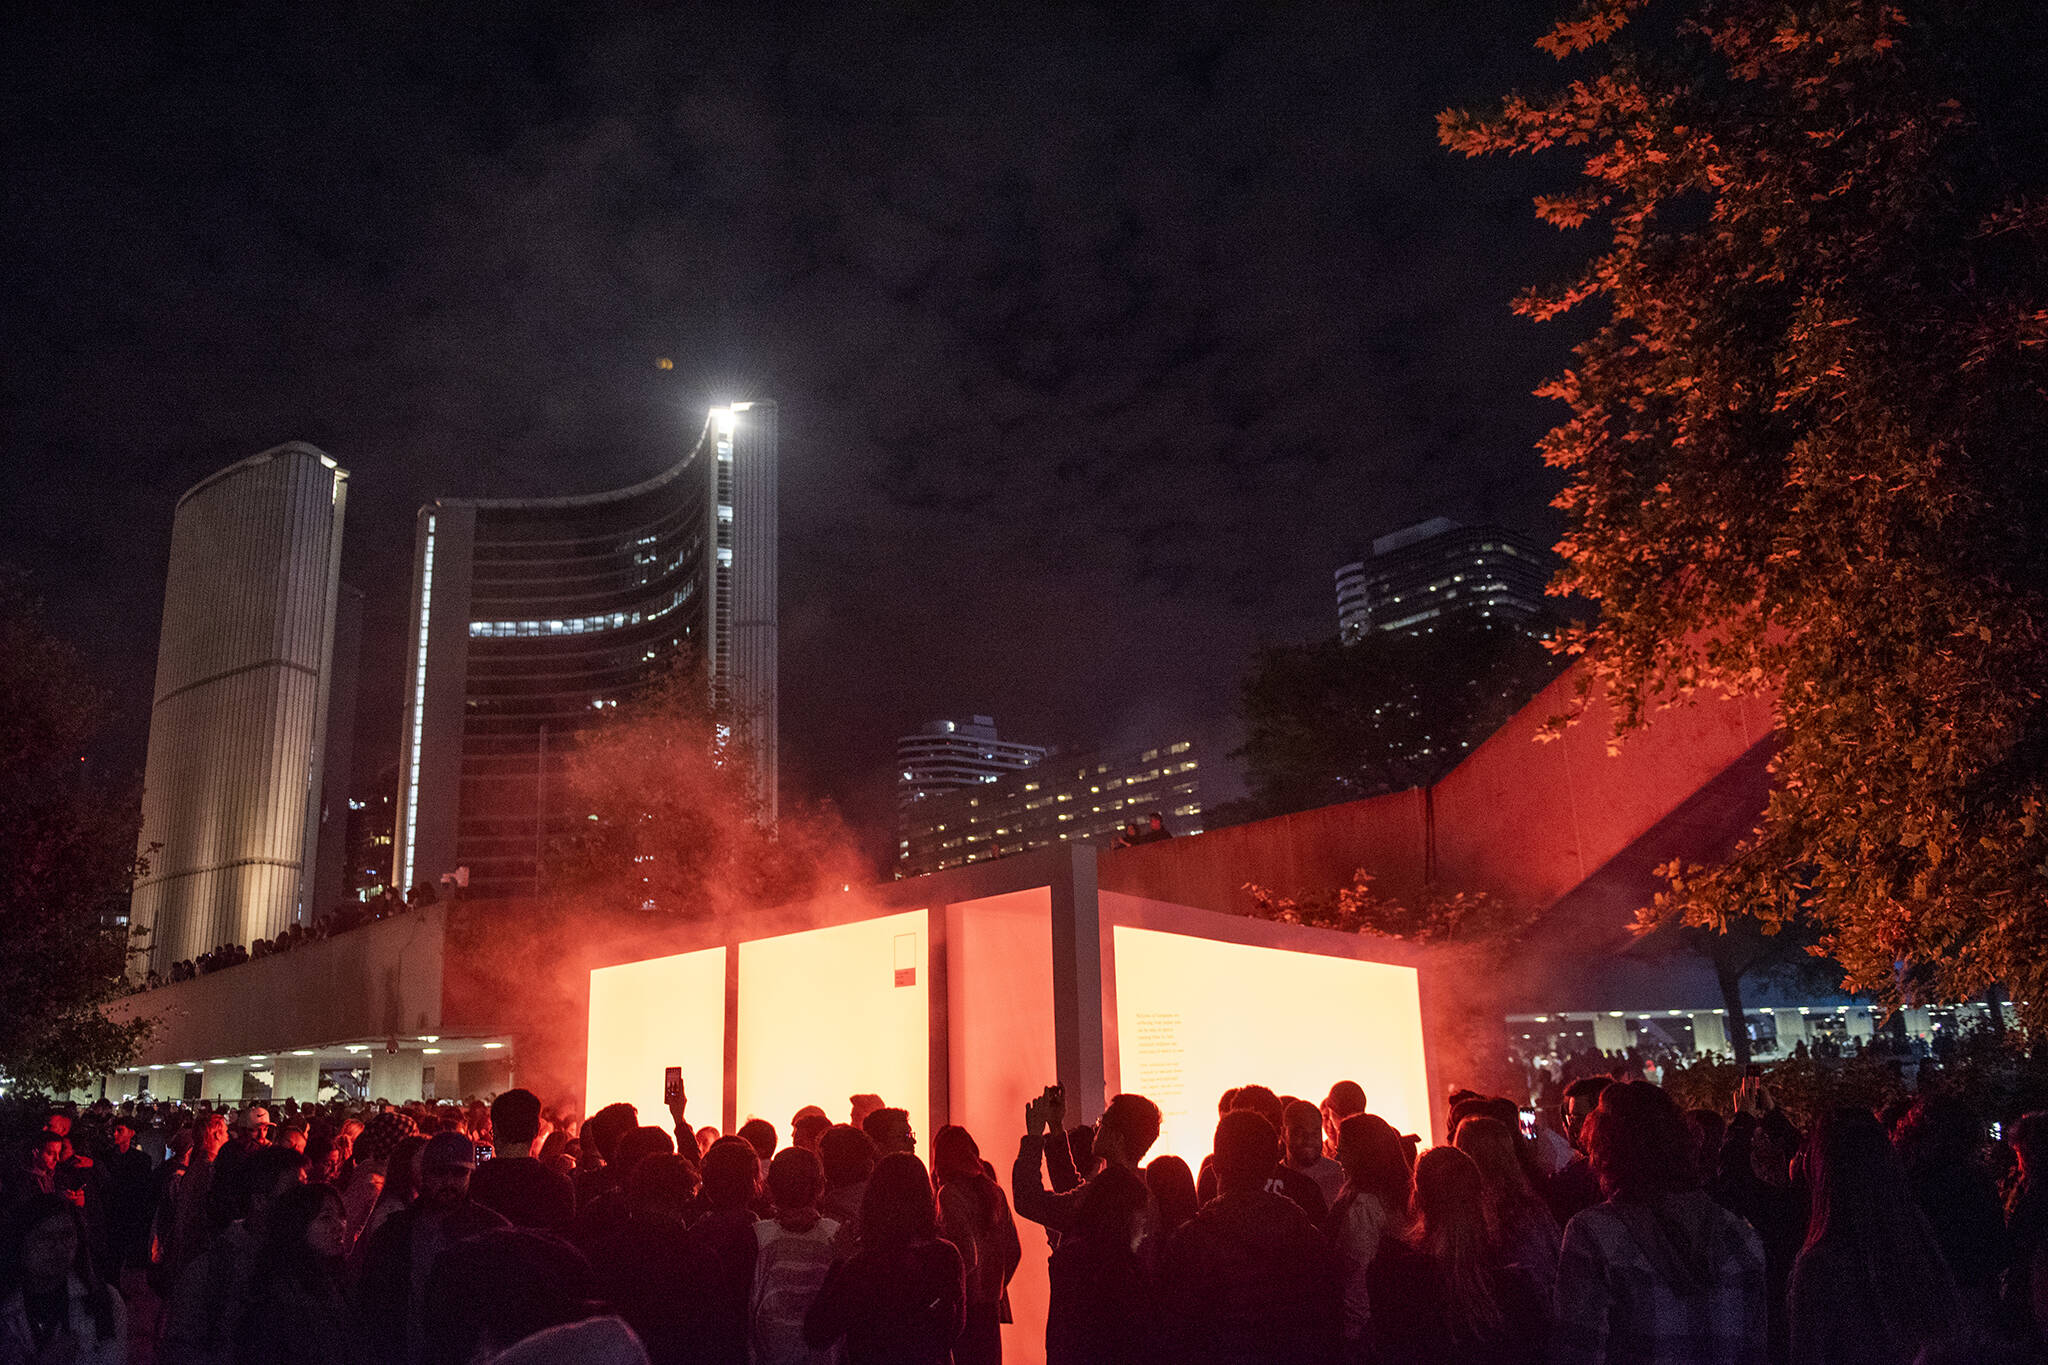 The latest edition of Nuit Blanche was one of its best yet